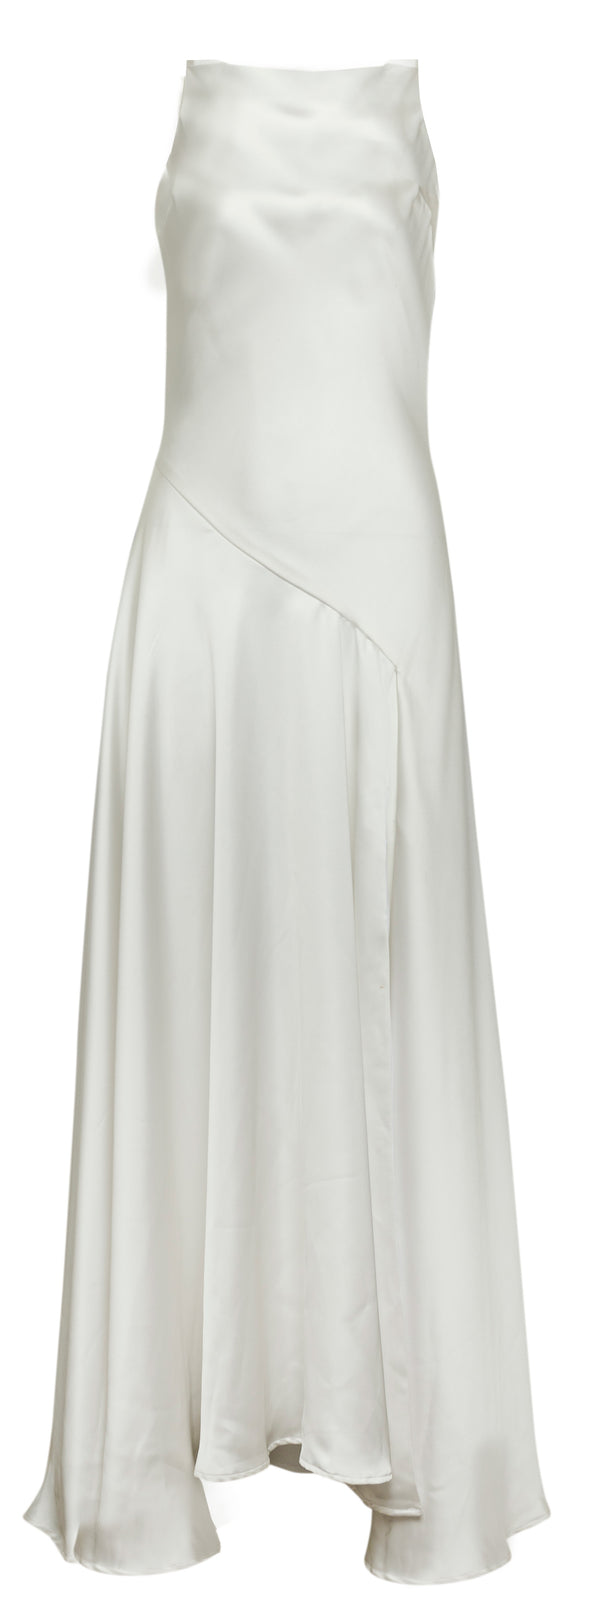 INES - Full length white satin dress with boat neckline and key hole back